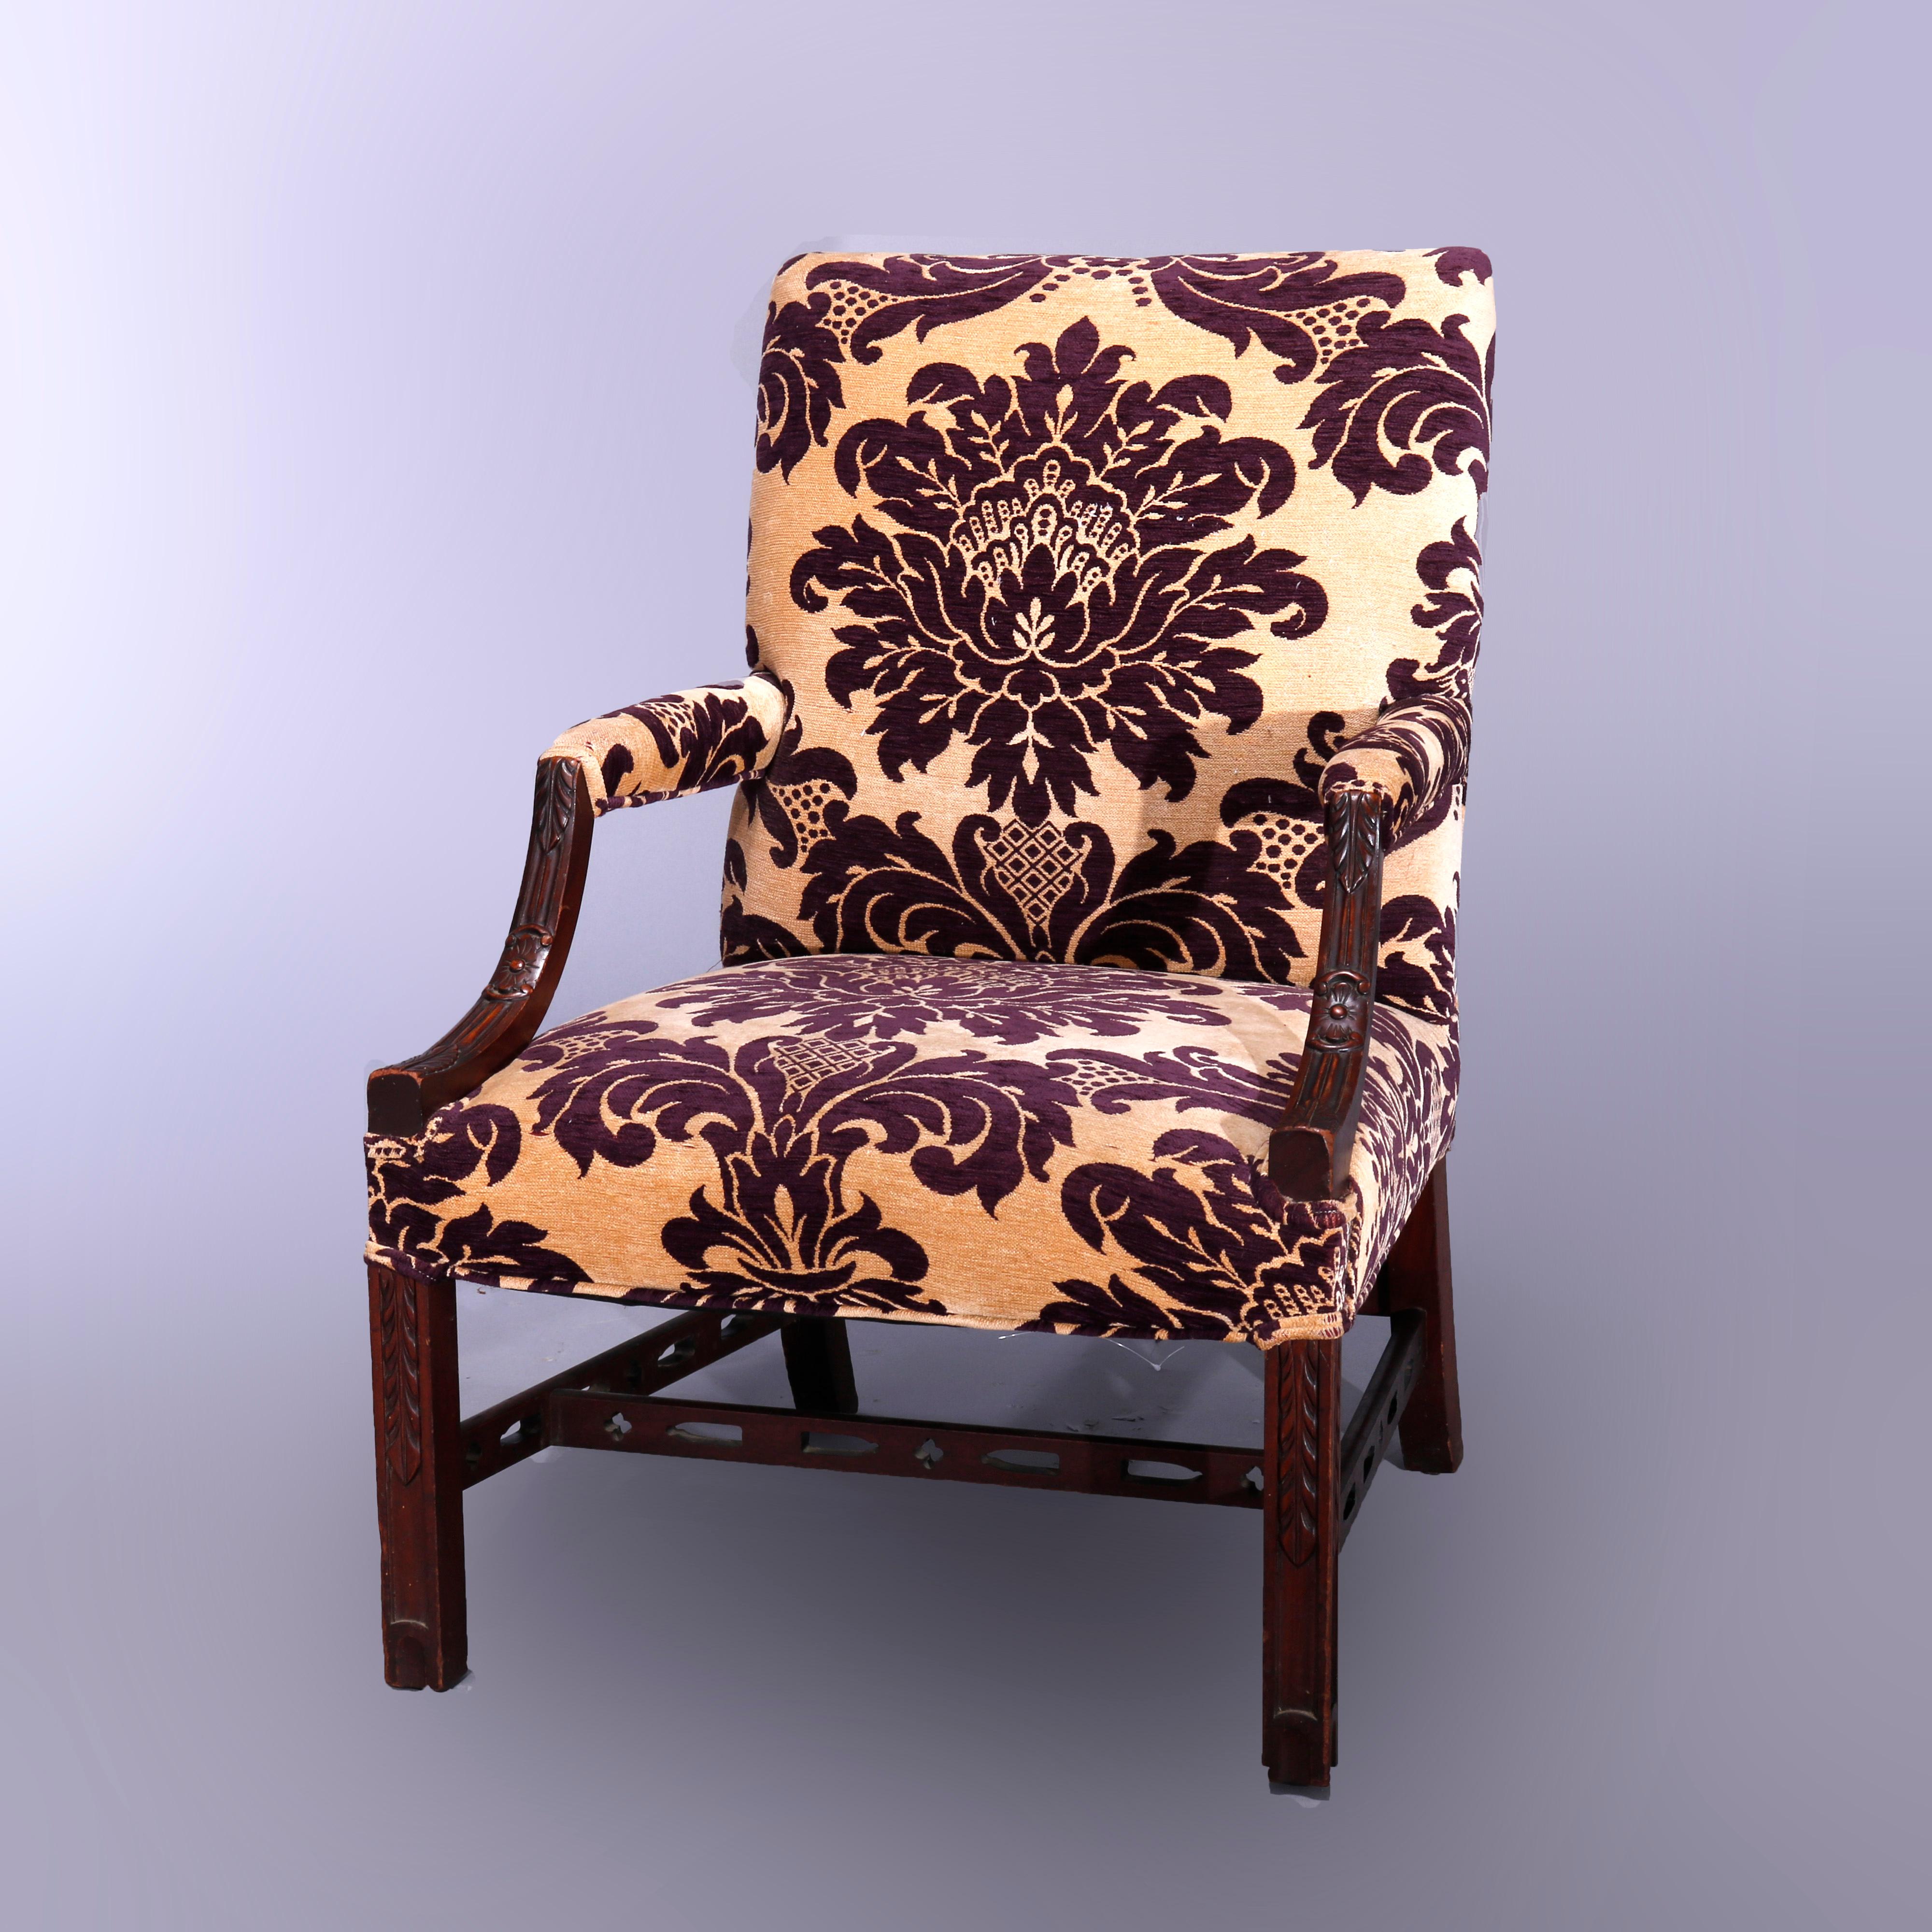 Wood Antique English Georgian Style Upholstered Mahogany Lolling Chair, circa 1920